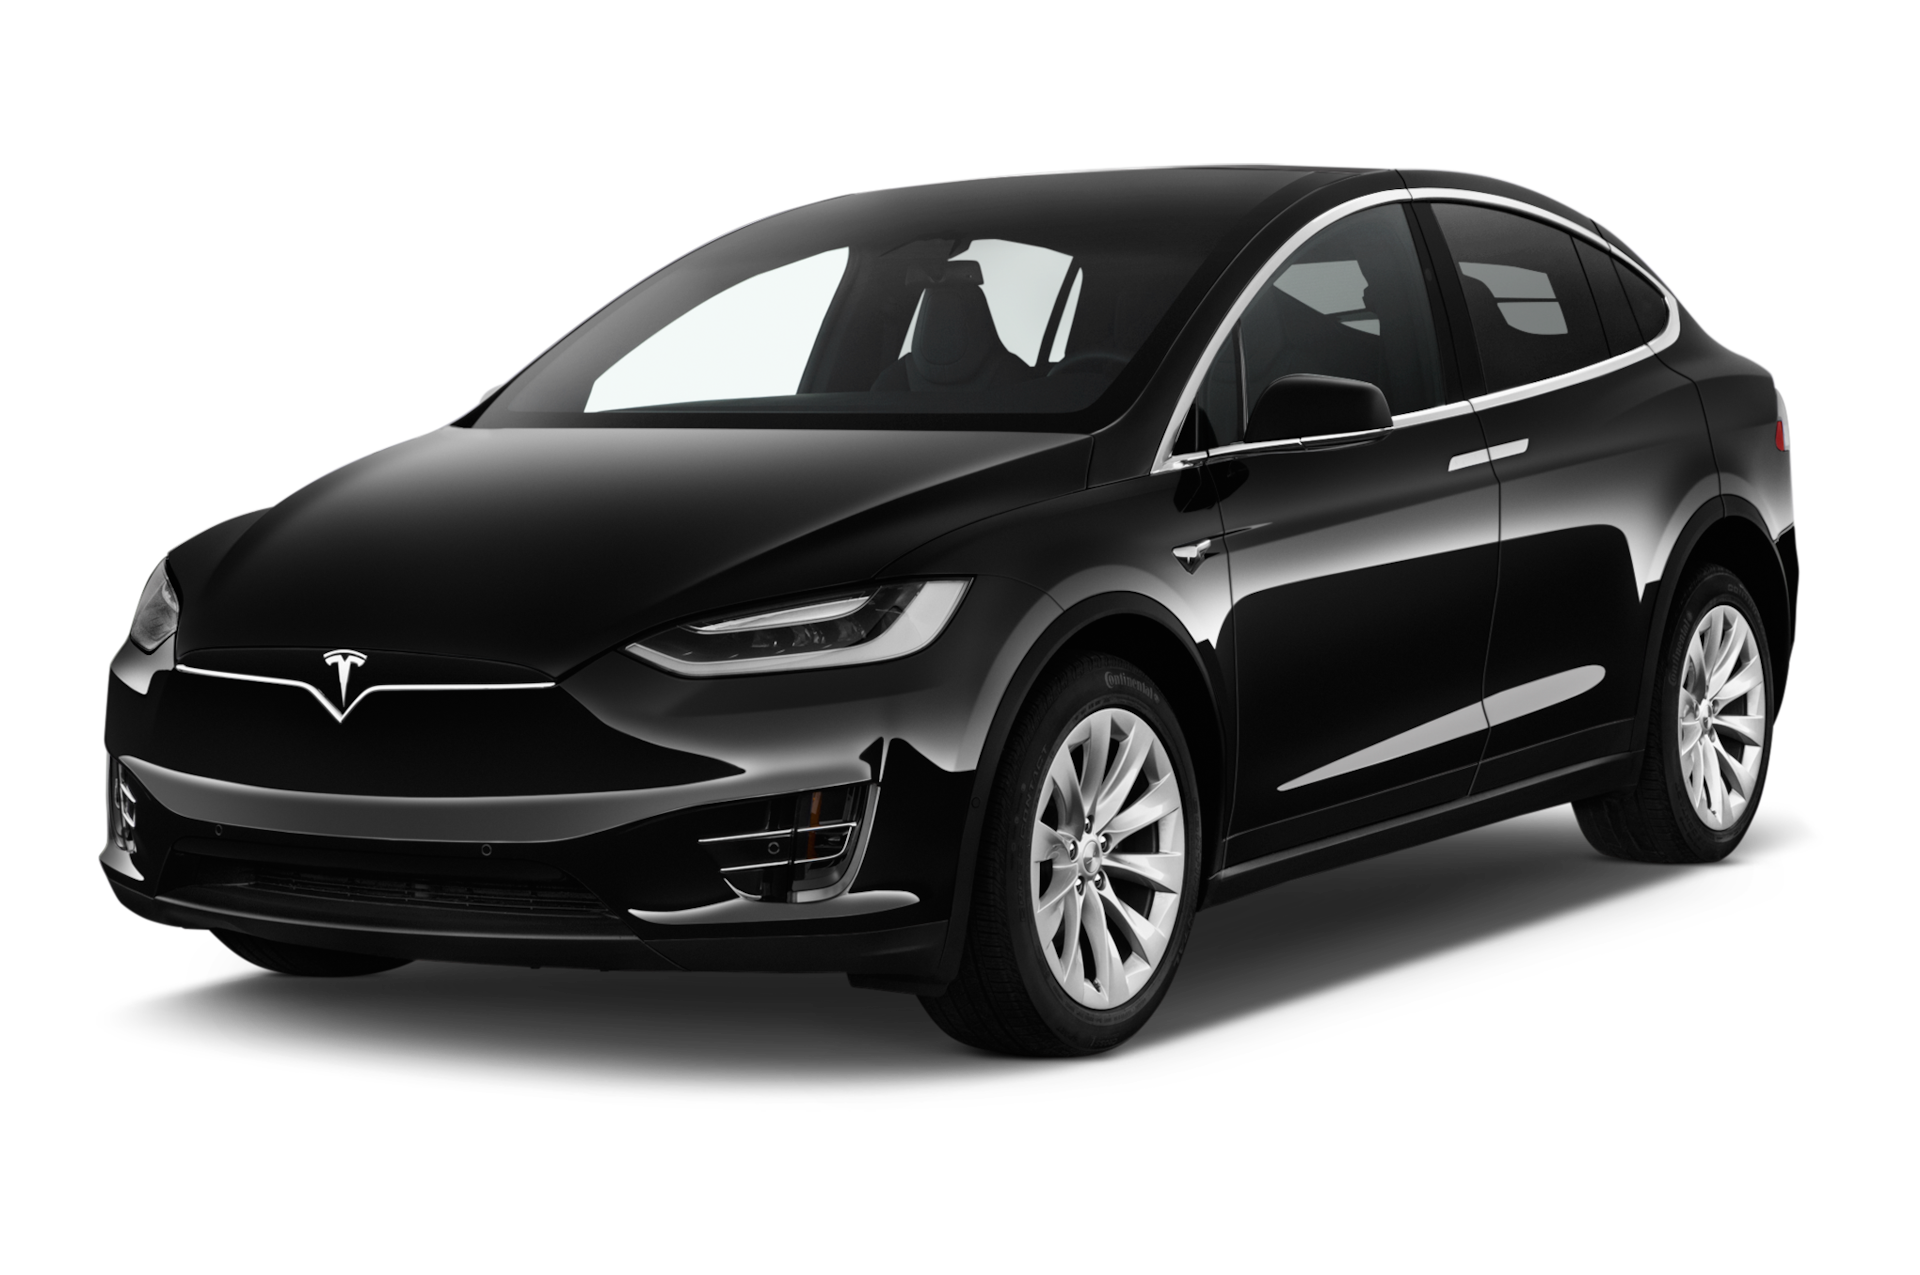 2018 Tesla Model X Prices, Reviews, and Photos - MotorTrend